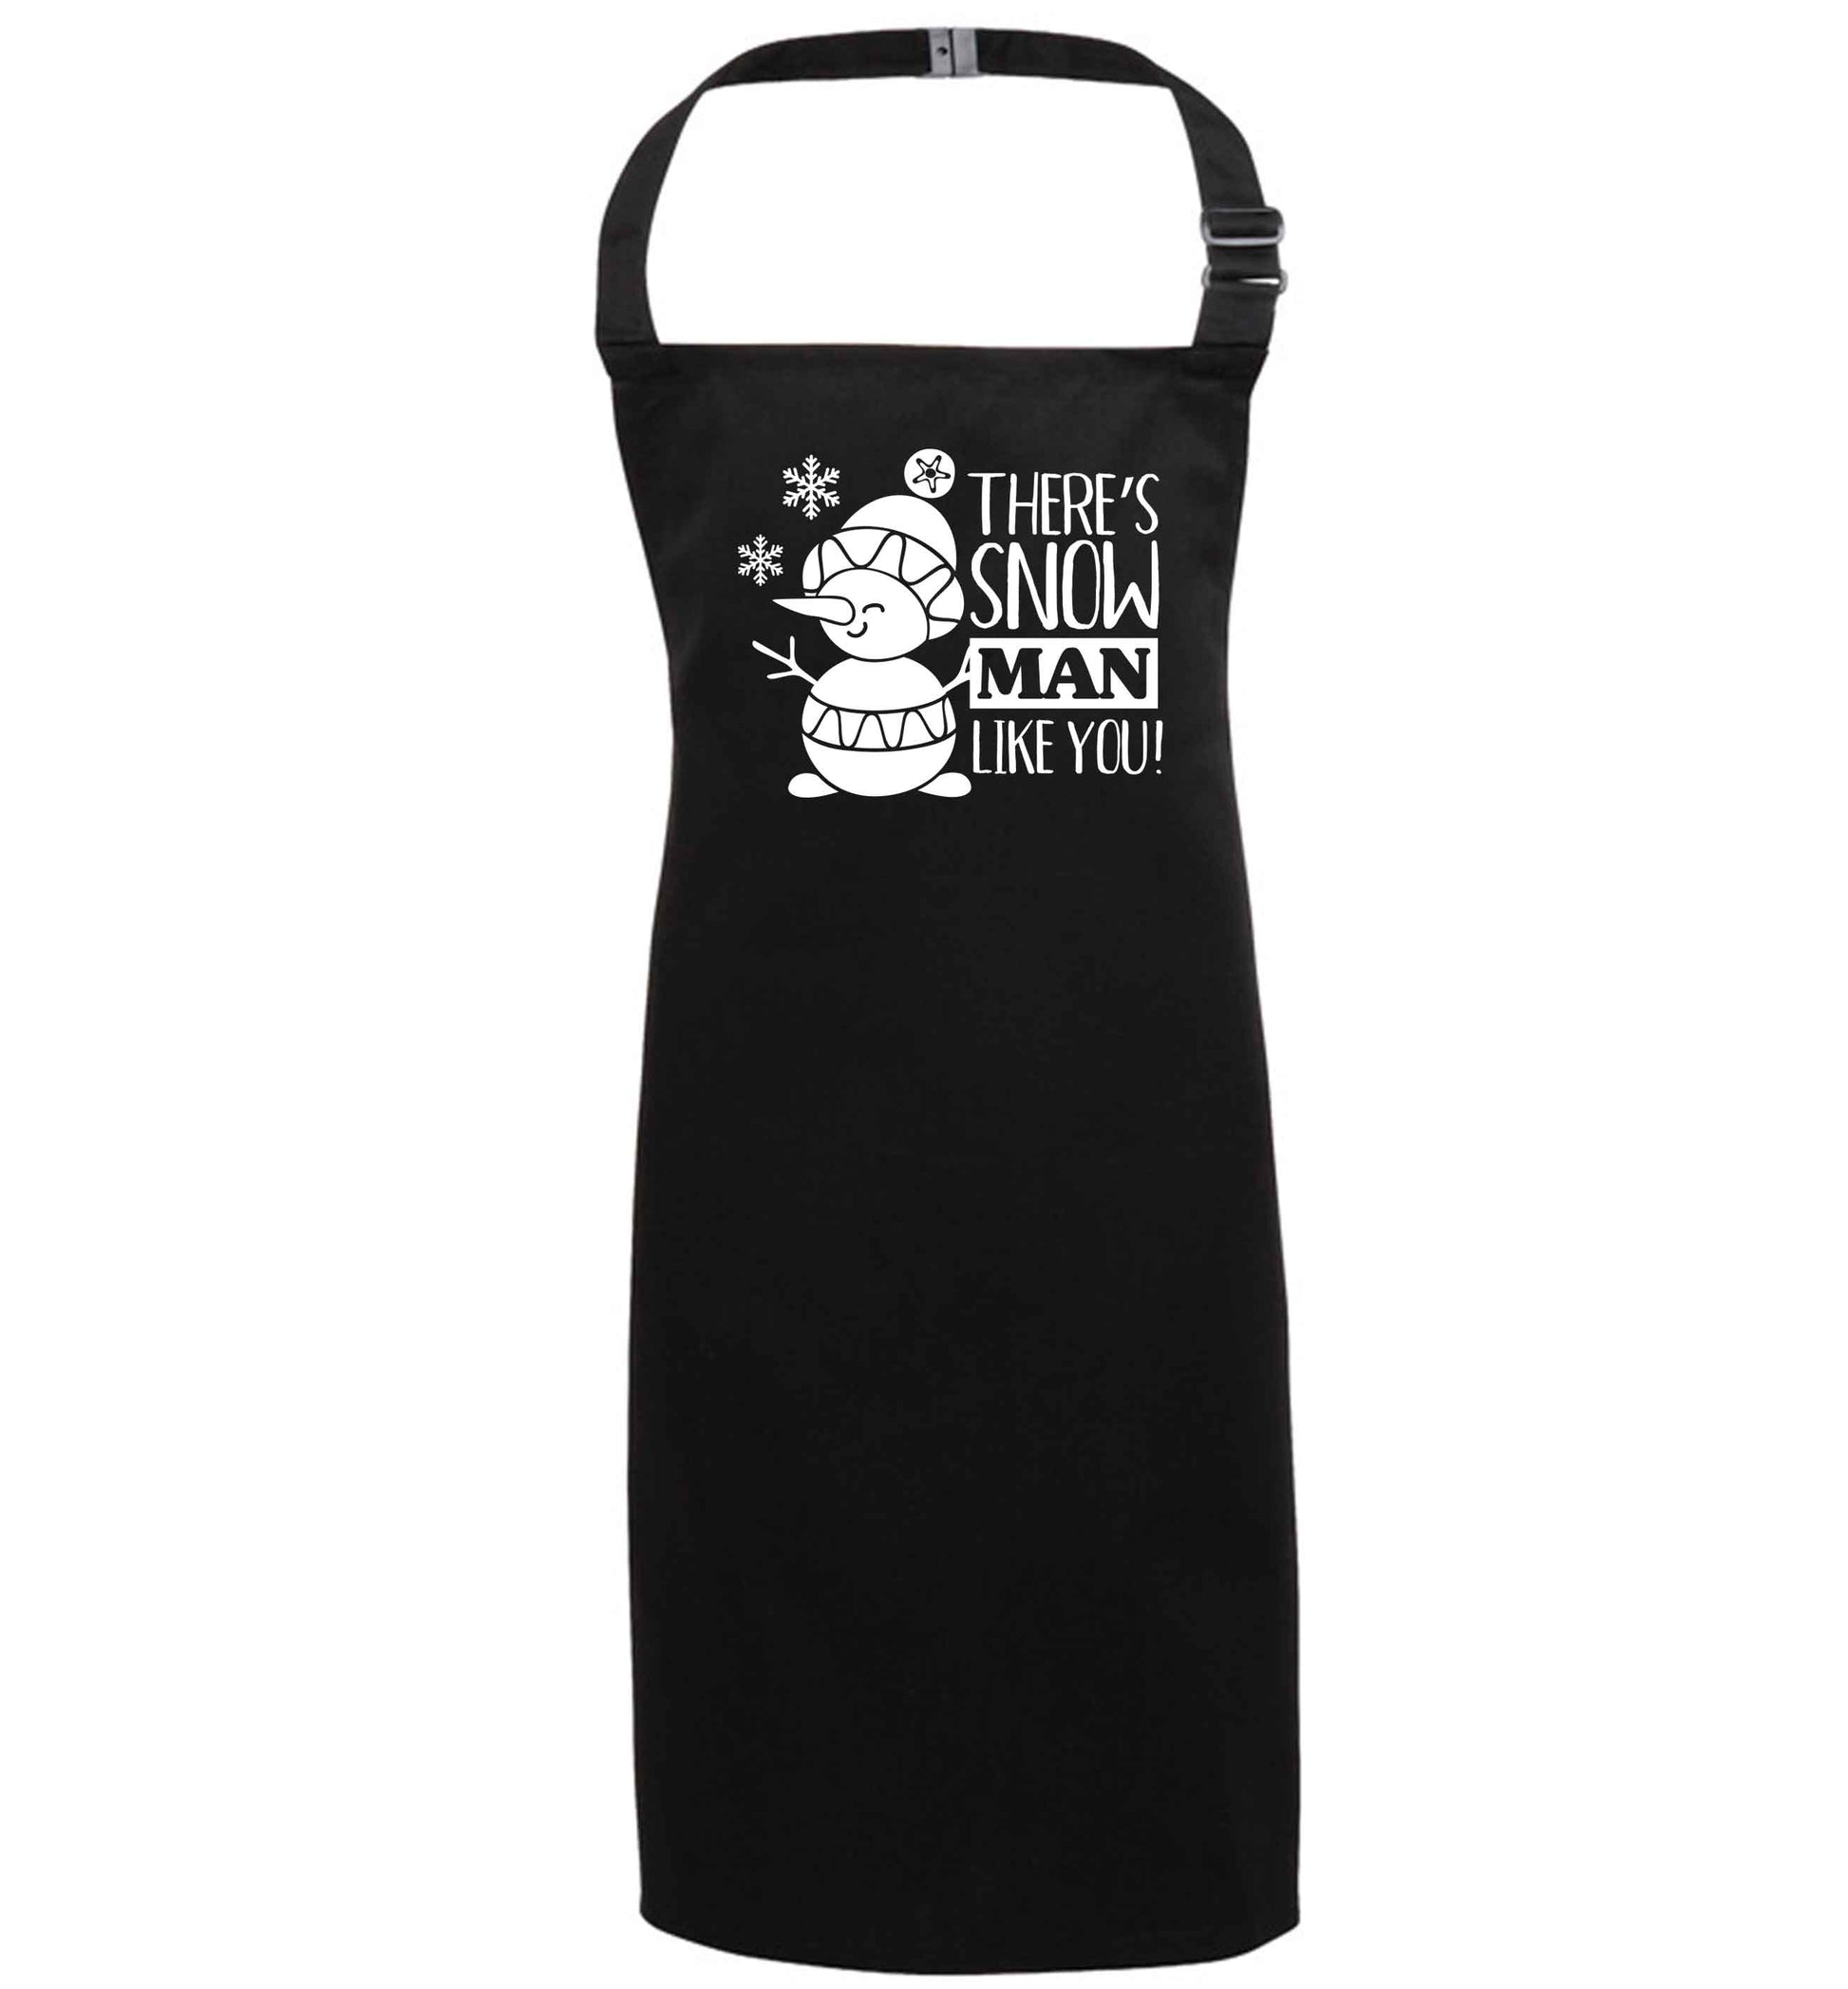 There's snow man like you black apron 7-10 years